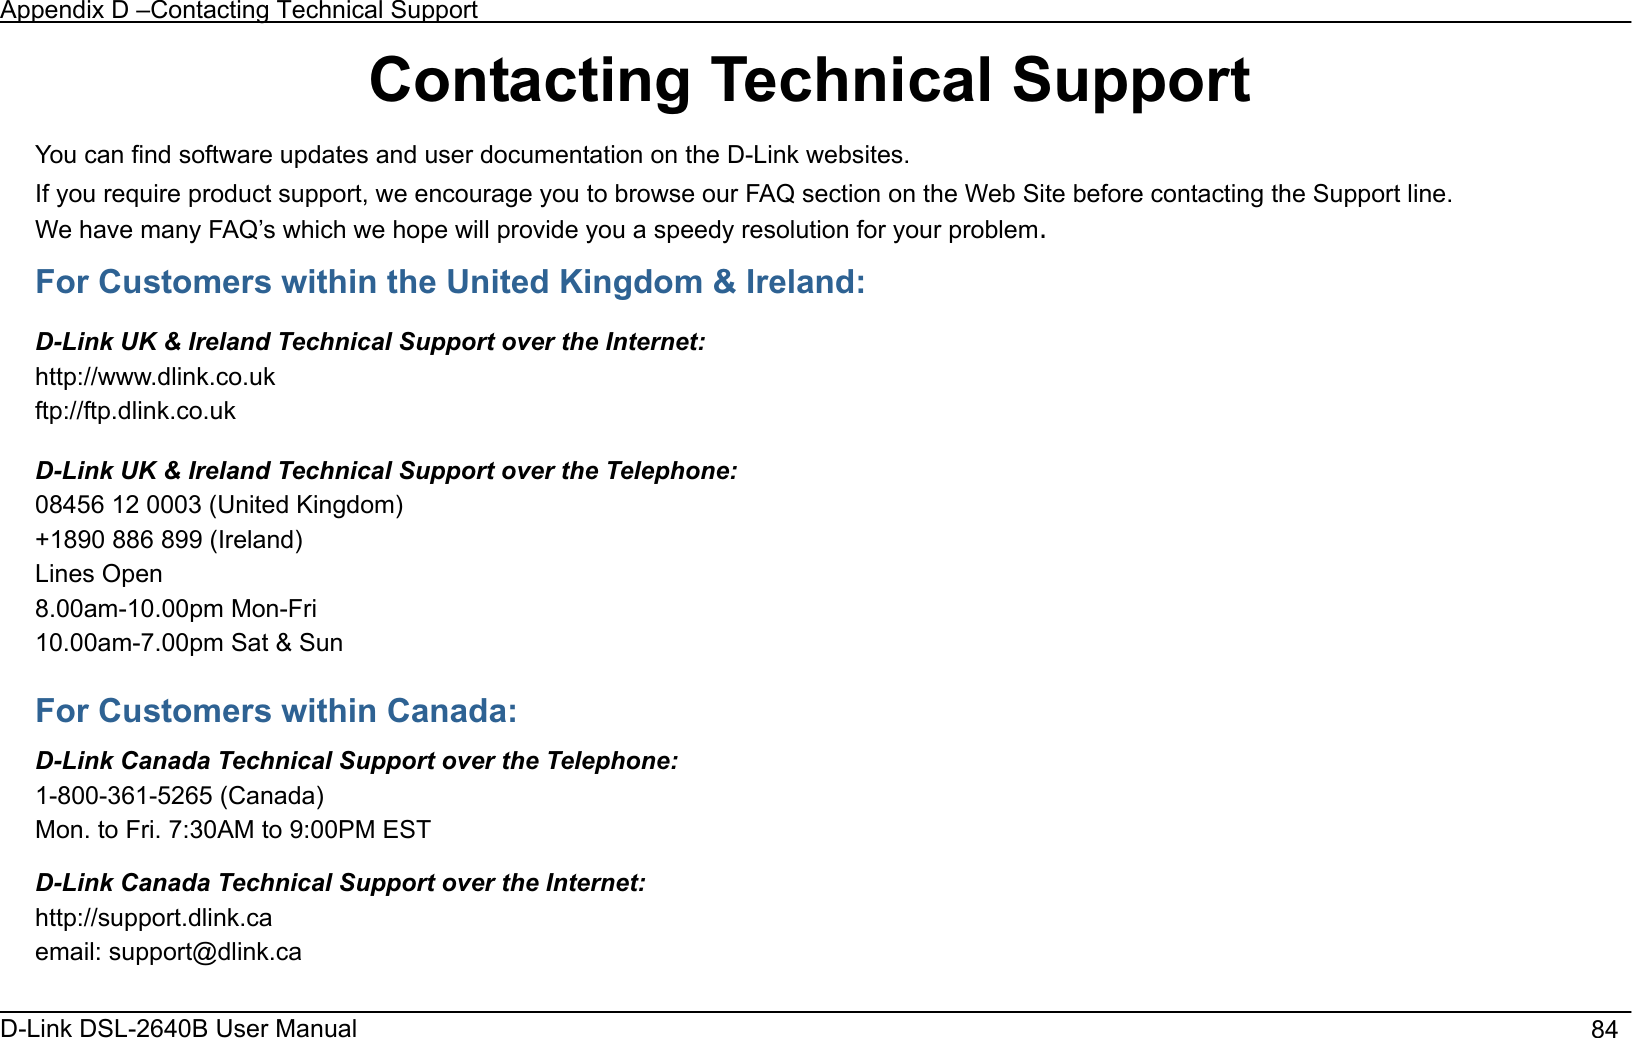 Appendix D –Contacting Technical Support D-Link DSL-2640B User Manual                                       84Contacting Technical Support You can find software updates and user documentation on the D-Link websites. If you require product support, we encourage you to browse our FAQ section on the Web Site before contacting the Support line. We have many FAQ’s which we hope will provide you a speedy resolution for your problem.For Customers within the United Kingdom &amp; Ireland: D-Link UK &amp; Ireland Technical Support over the Internet: http://www.dlink.co.uk ftp://ftp.dlink.co.uk D-Link UK &amp; Ireland Technical Support over the Telephone: 08456 12 0003 (United Kingdom) +1890 886 899 (Ireland) Lines Open 8.00am-10.00pm Mon-Fri 10.00am-7.00pm Sat &amp; Sun For Customers within Canada: D-Link Canada Technical Support over the Telephone:1-800-361-5265 (Canada) Mon. to Fri. 7:30AM to 9:00PM EST D-Link Canada Technical Support over the Internet: http://support.dlink.caemail: support@dlink.ca